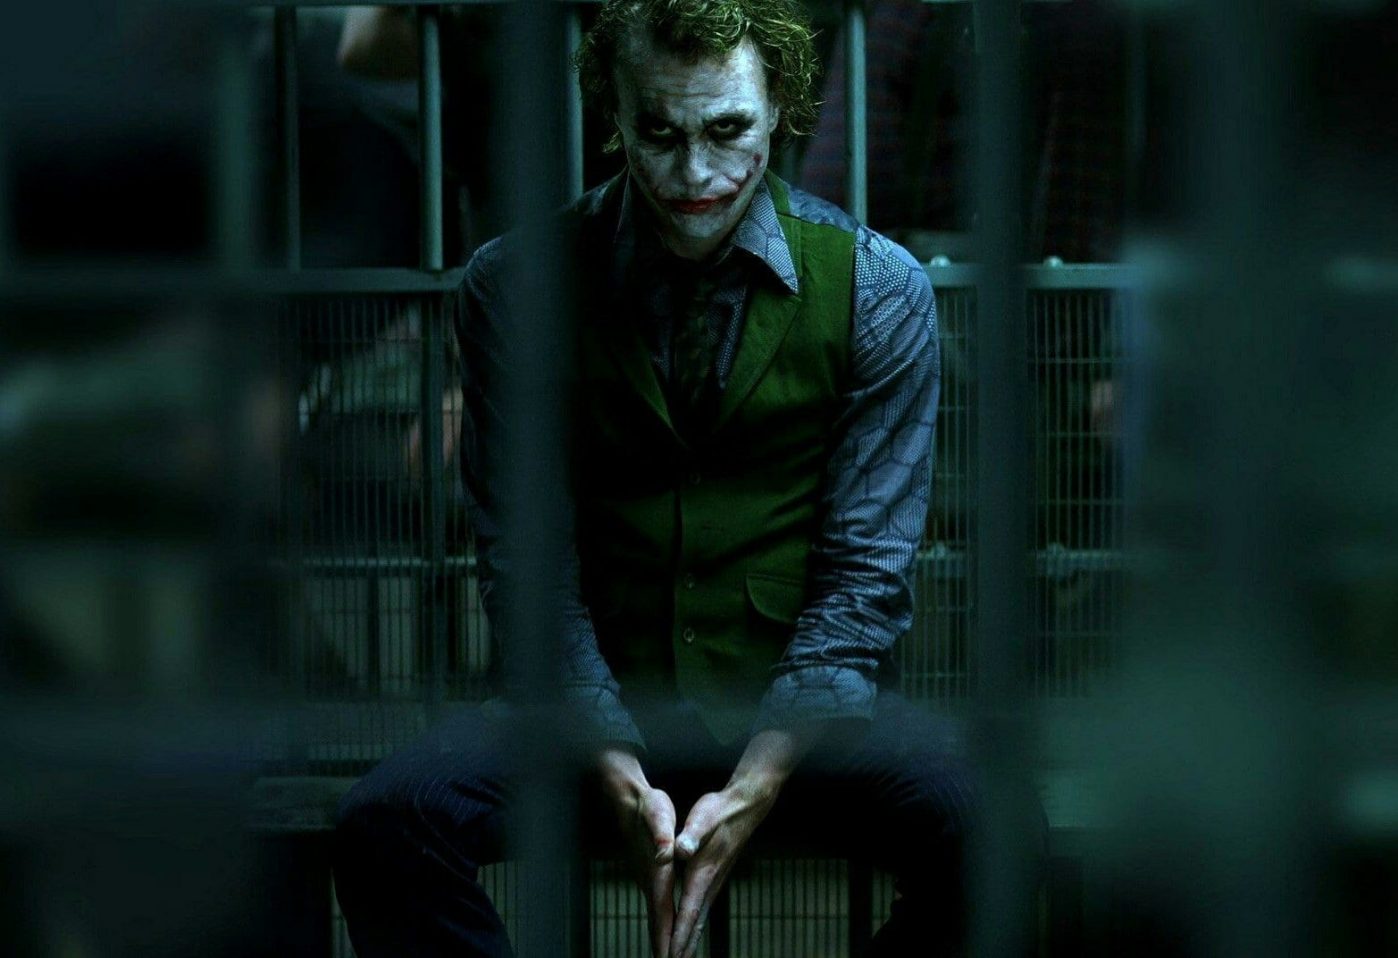 Heath Ledger's version of the iconic Joker is widely considered the best live-action character